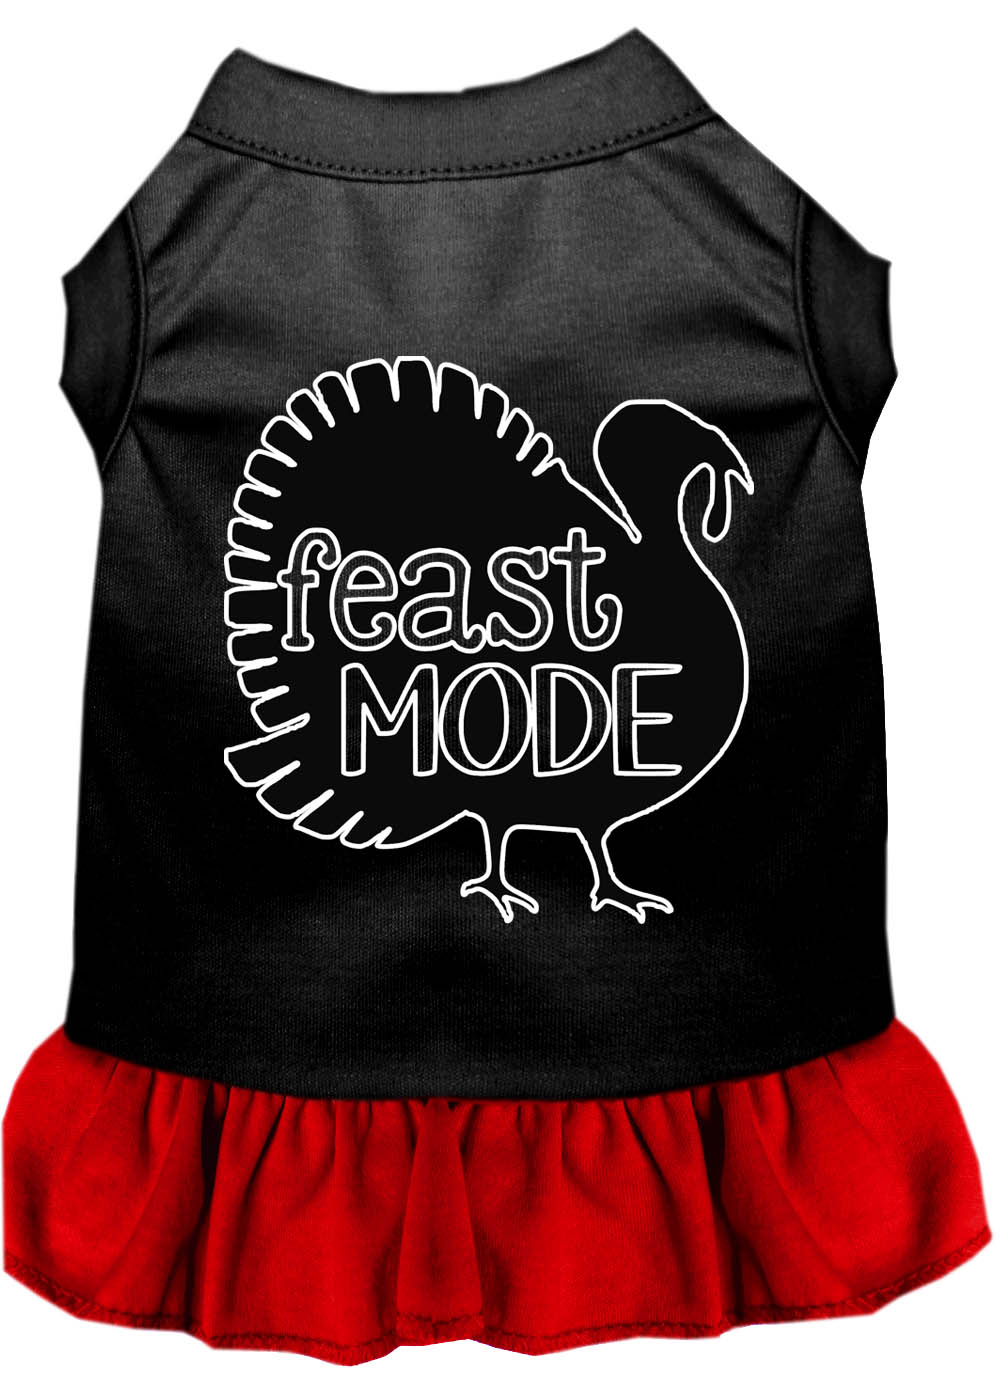 Feast Mode Screen Print Dog Dress Black with Red Sm